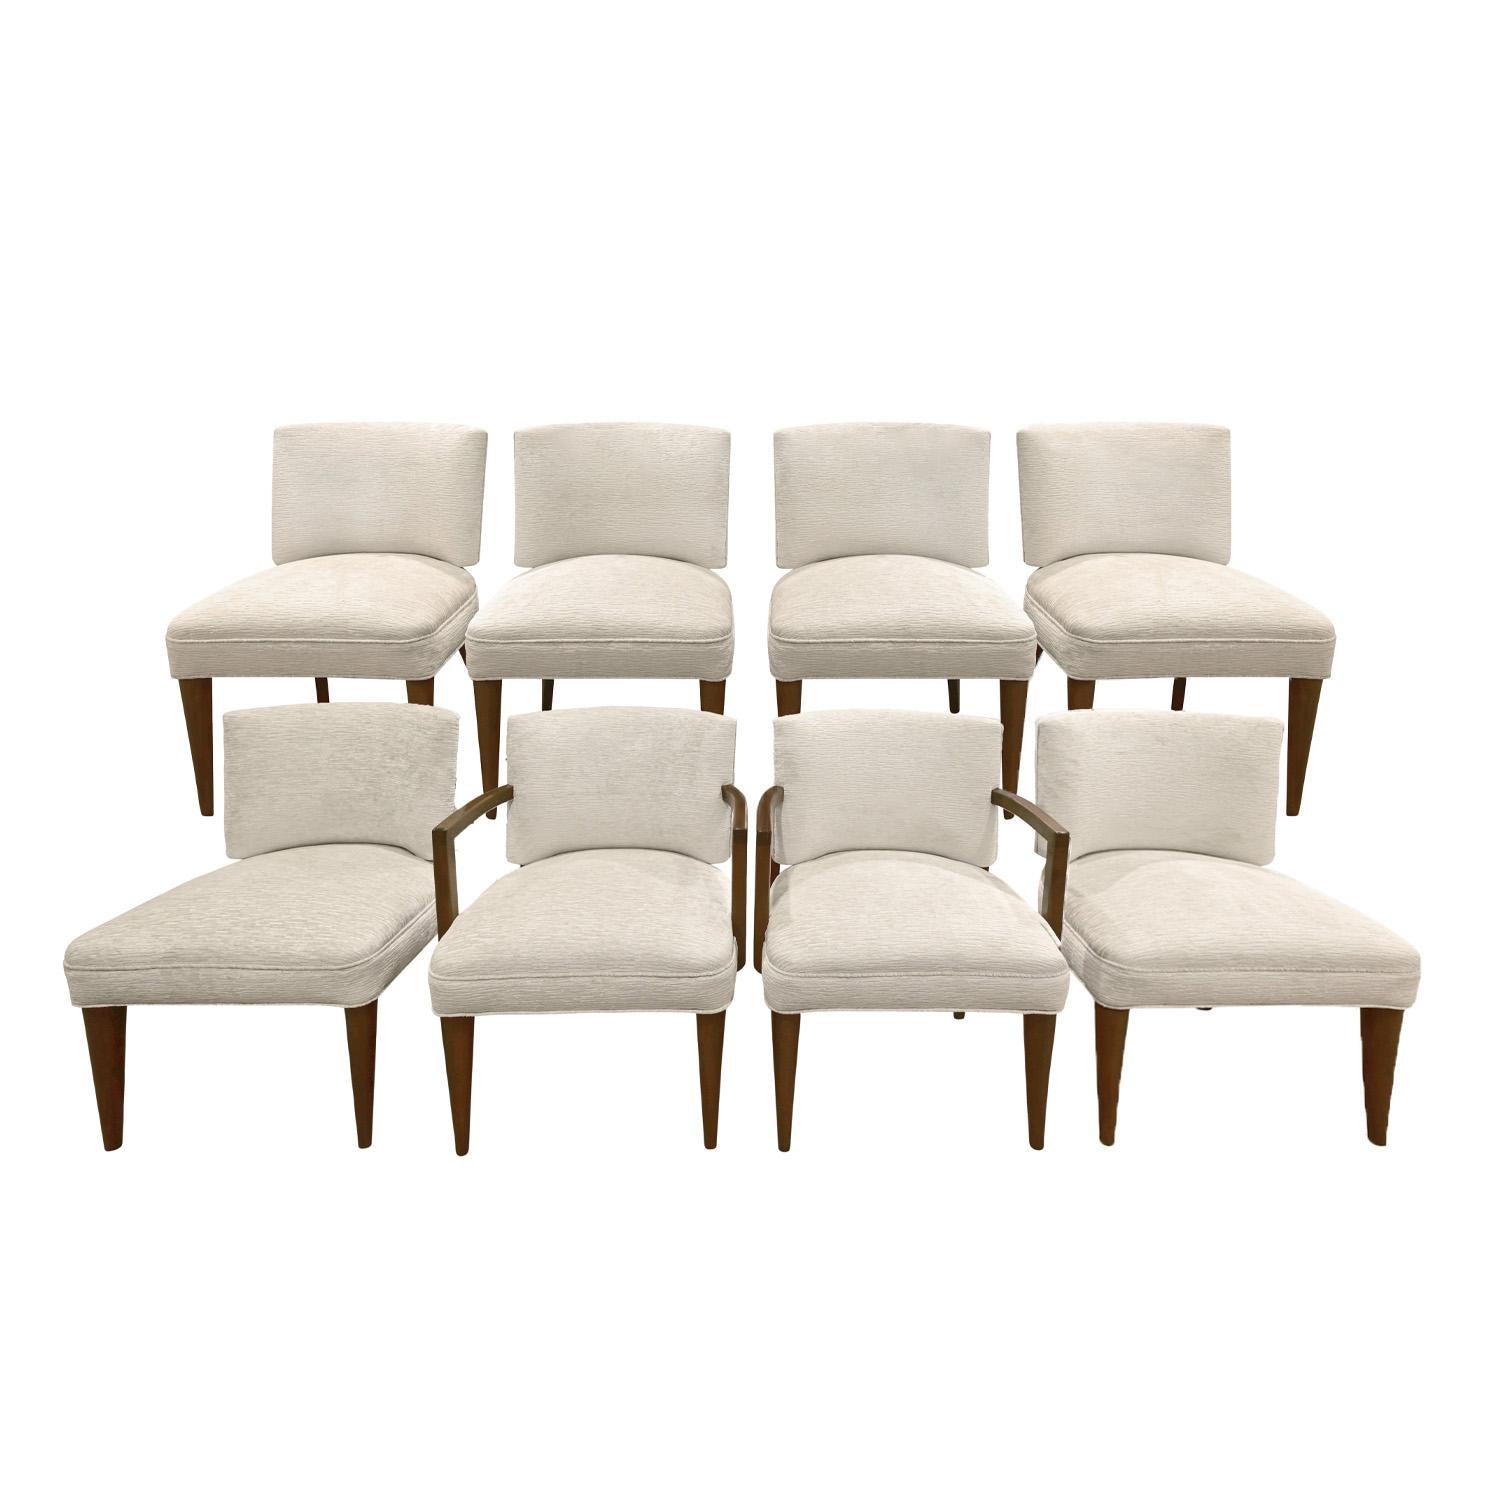 Set of 8 elegant upholstered dining chairs model  (2 arm chairs model No. 4196 and 6 side chairs model No. 4195), legs and arms in dark Pacific walnut with beautifully curved backs, by Gilbert Rohde for Herman Miller, Paldao Group, American 1940's. 